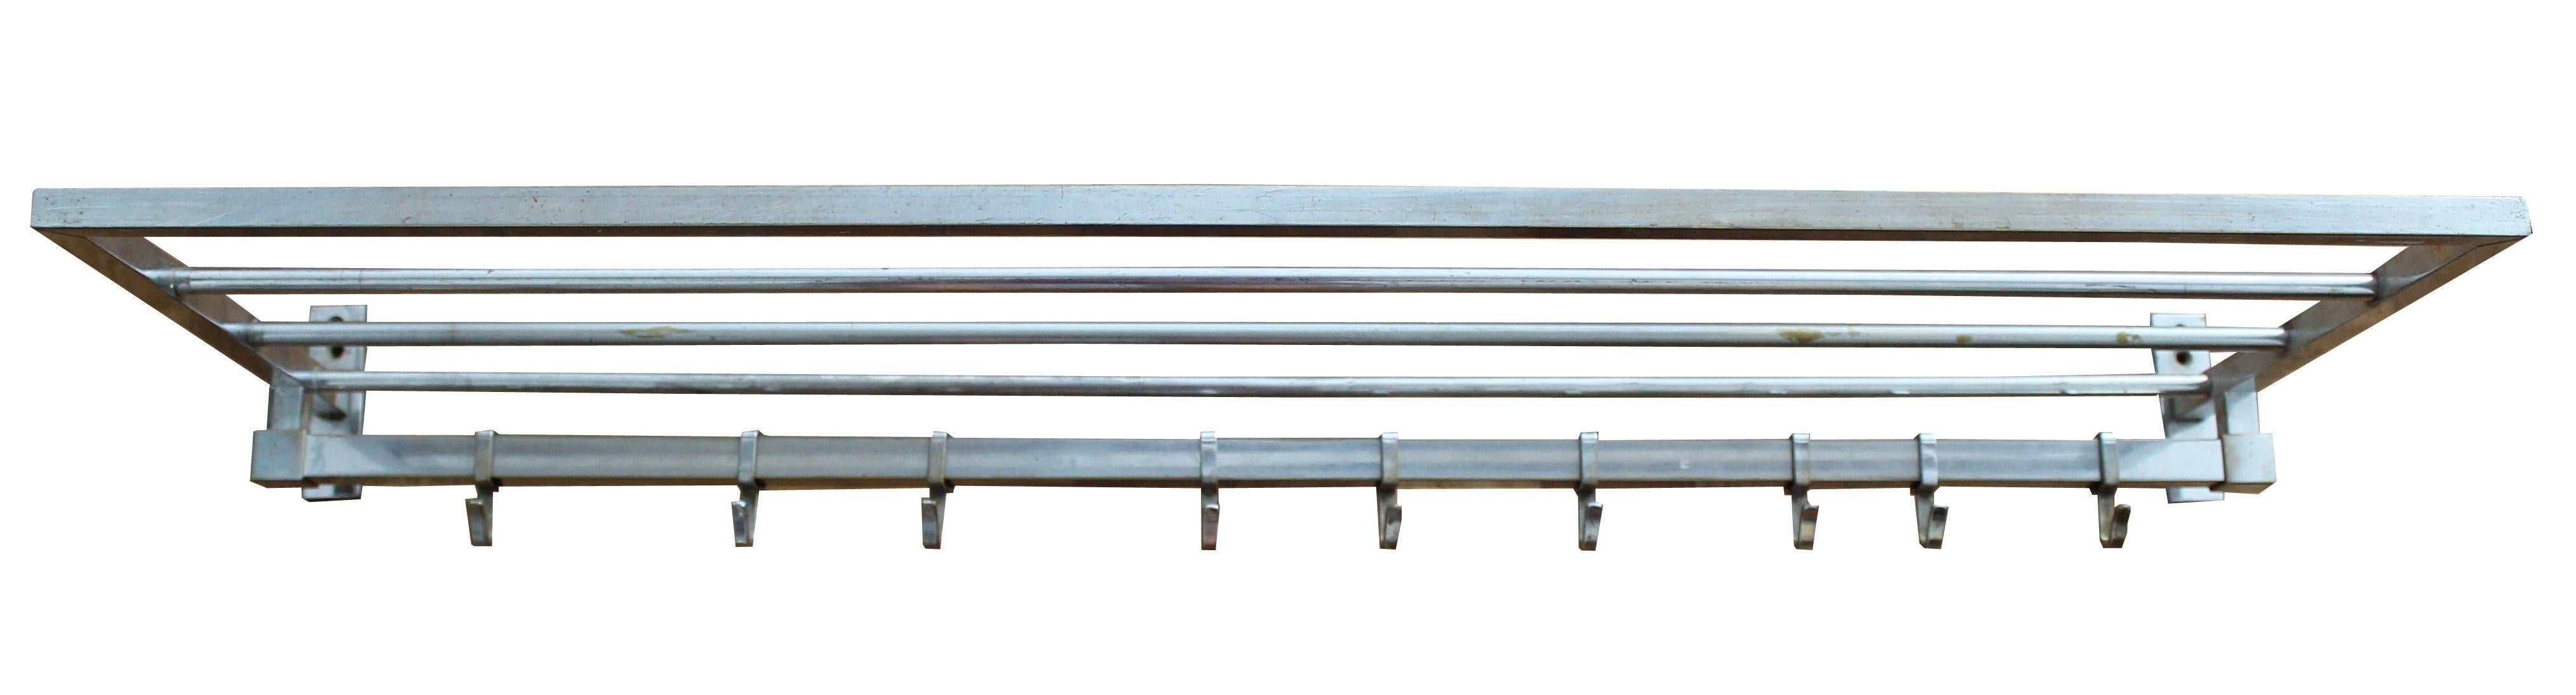 A pair of Art Deco nickel-plated brass wall hung coat racks produced in the 1930s. The pair have a minimalistic design with an eye for the practicality of everyday use. Each piece has nine hooks and a wire shelf above for storage.
This coat rack